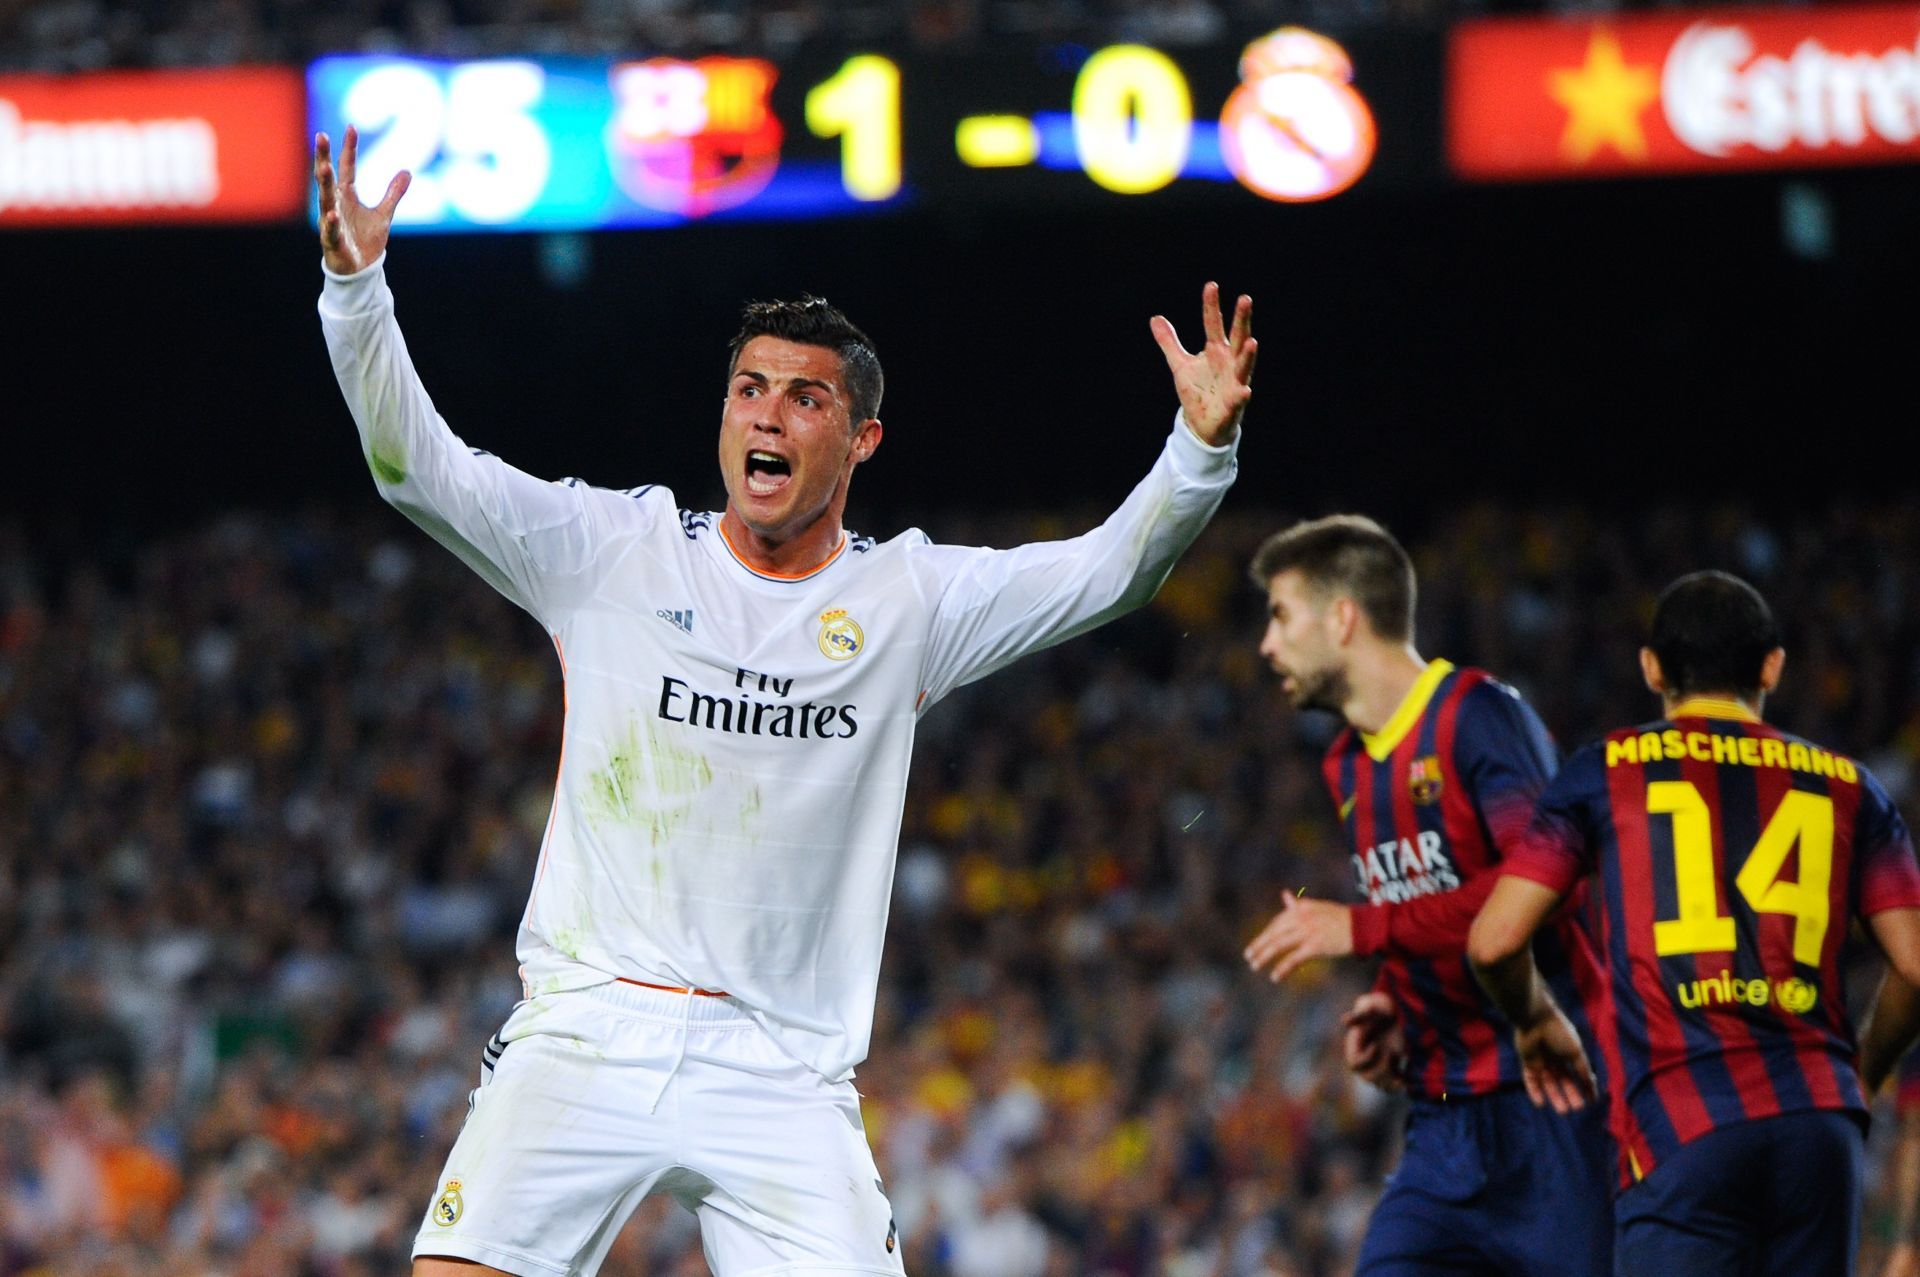 Cristiano Ronaldo holds the record for the most consecutive El Clasicos scored in.